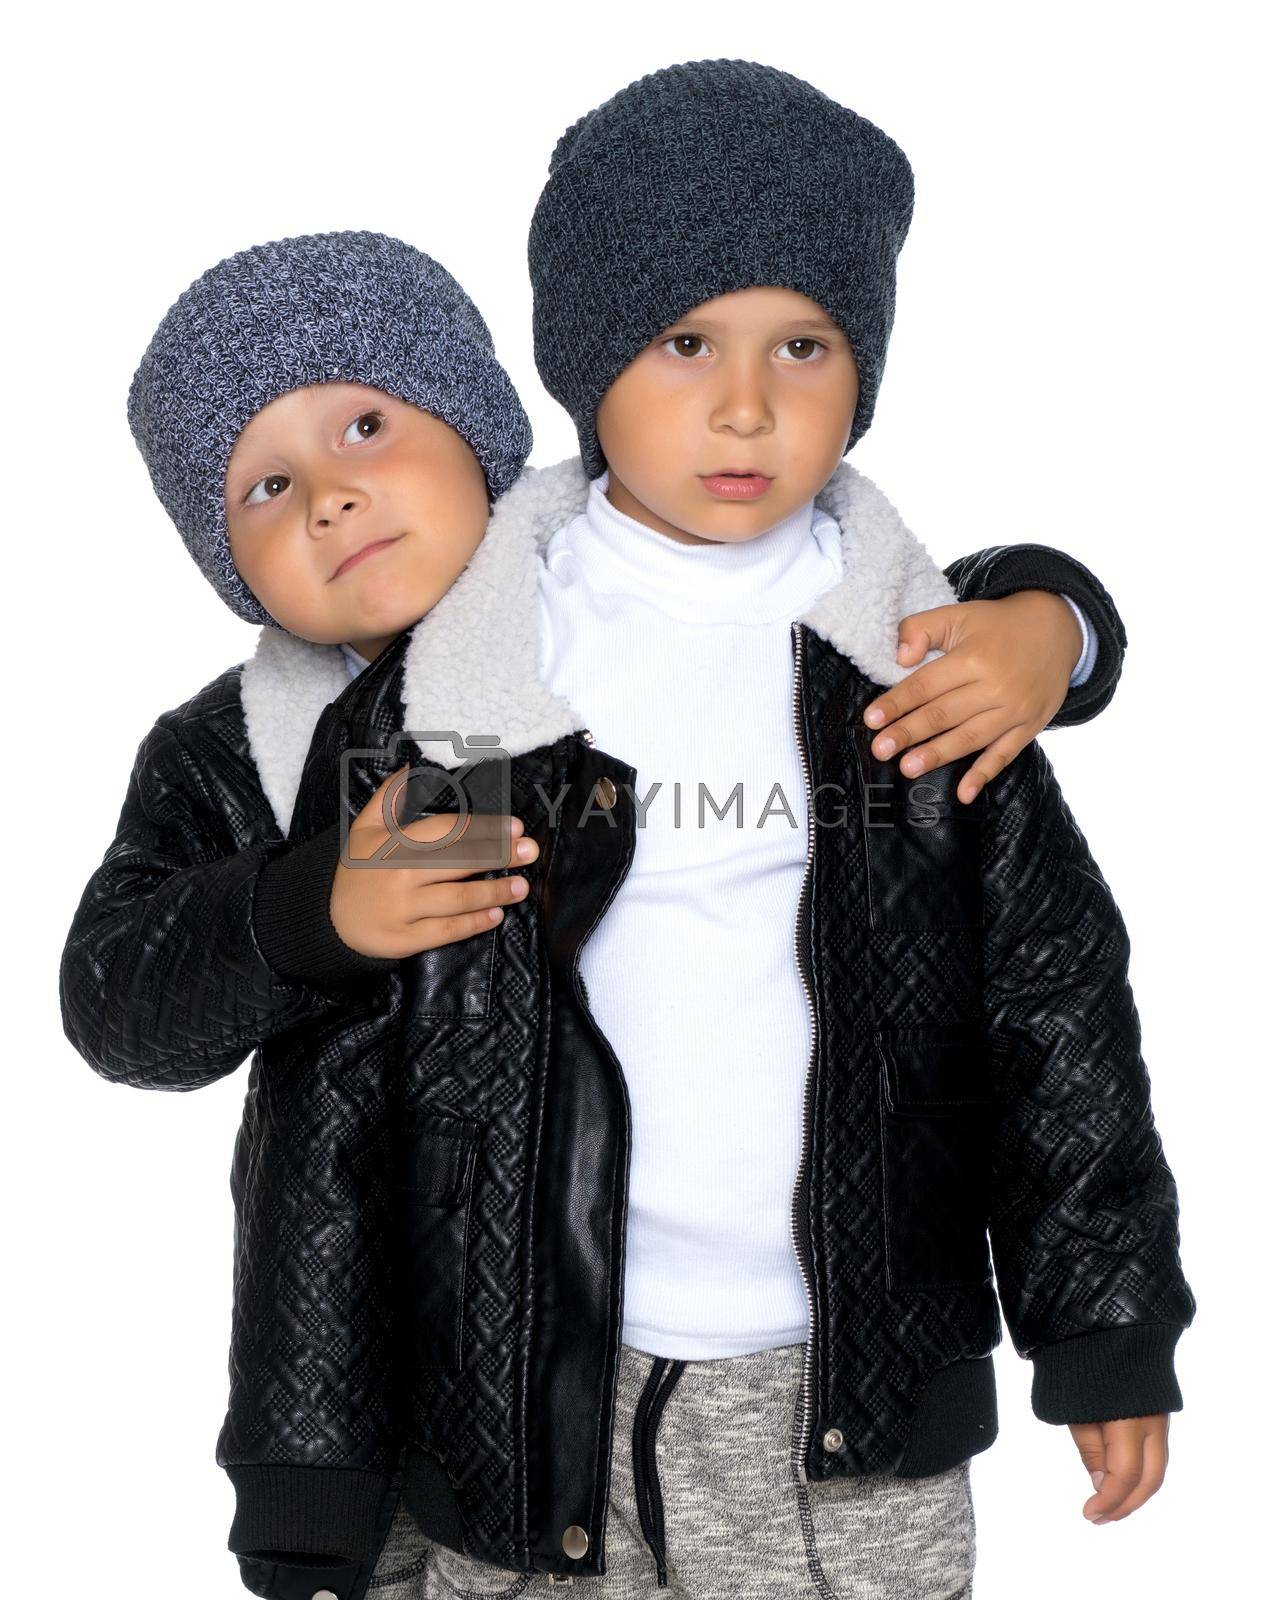 Royalty free image of Two little boys in black jackets and hats. by kolesnikov_studio